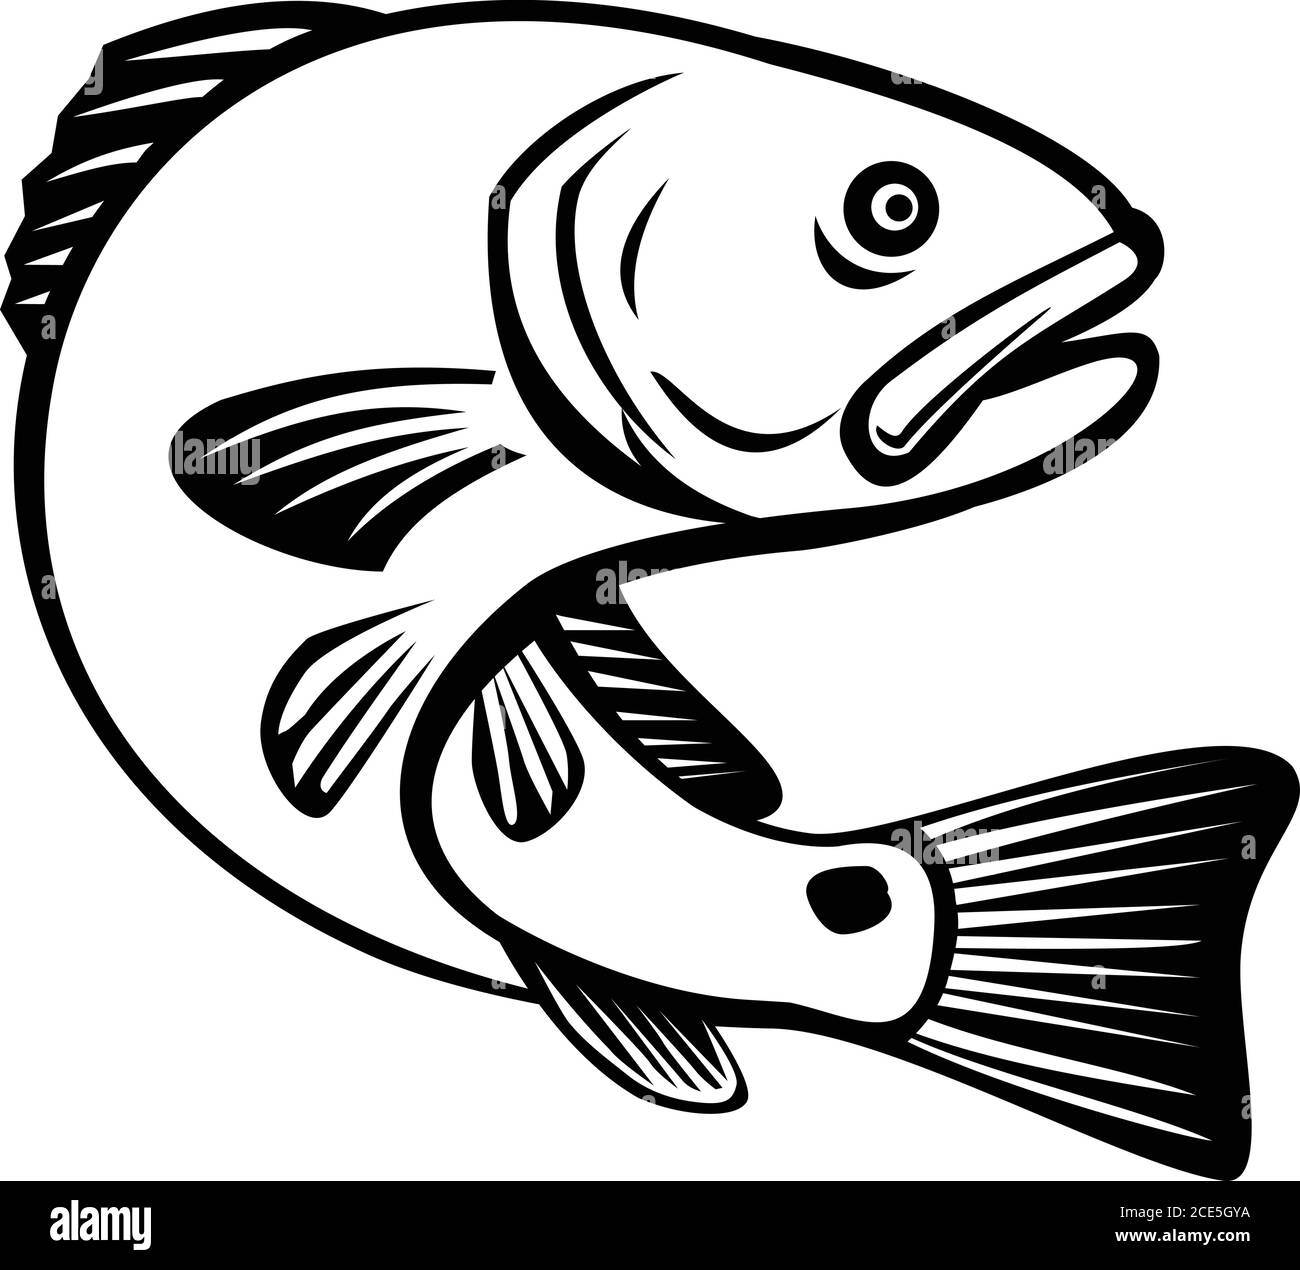 Illustration of a red drum, redfish, channel bass, puppy drum or spottail bass, a game fish found in the Atlantic Ocean from Florida to northern Mexic Stock Vector